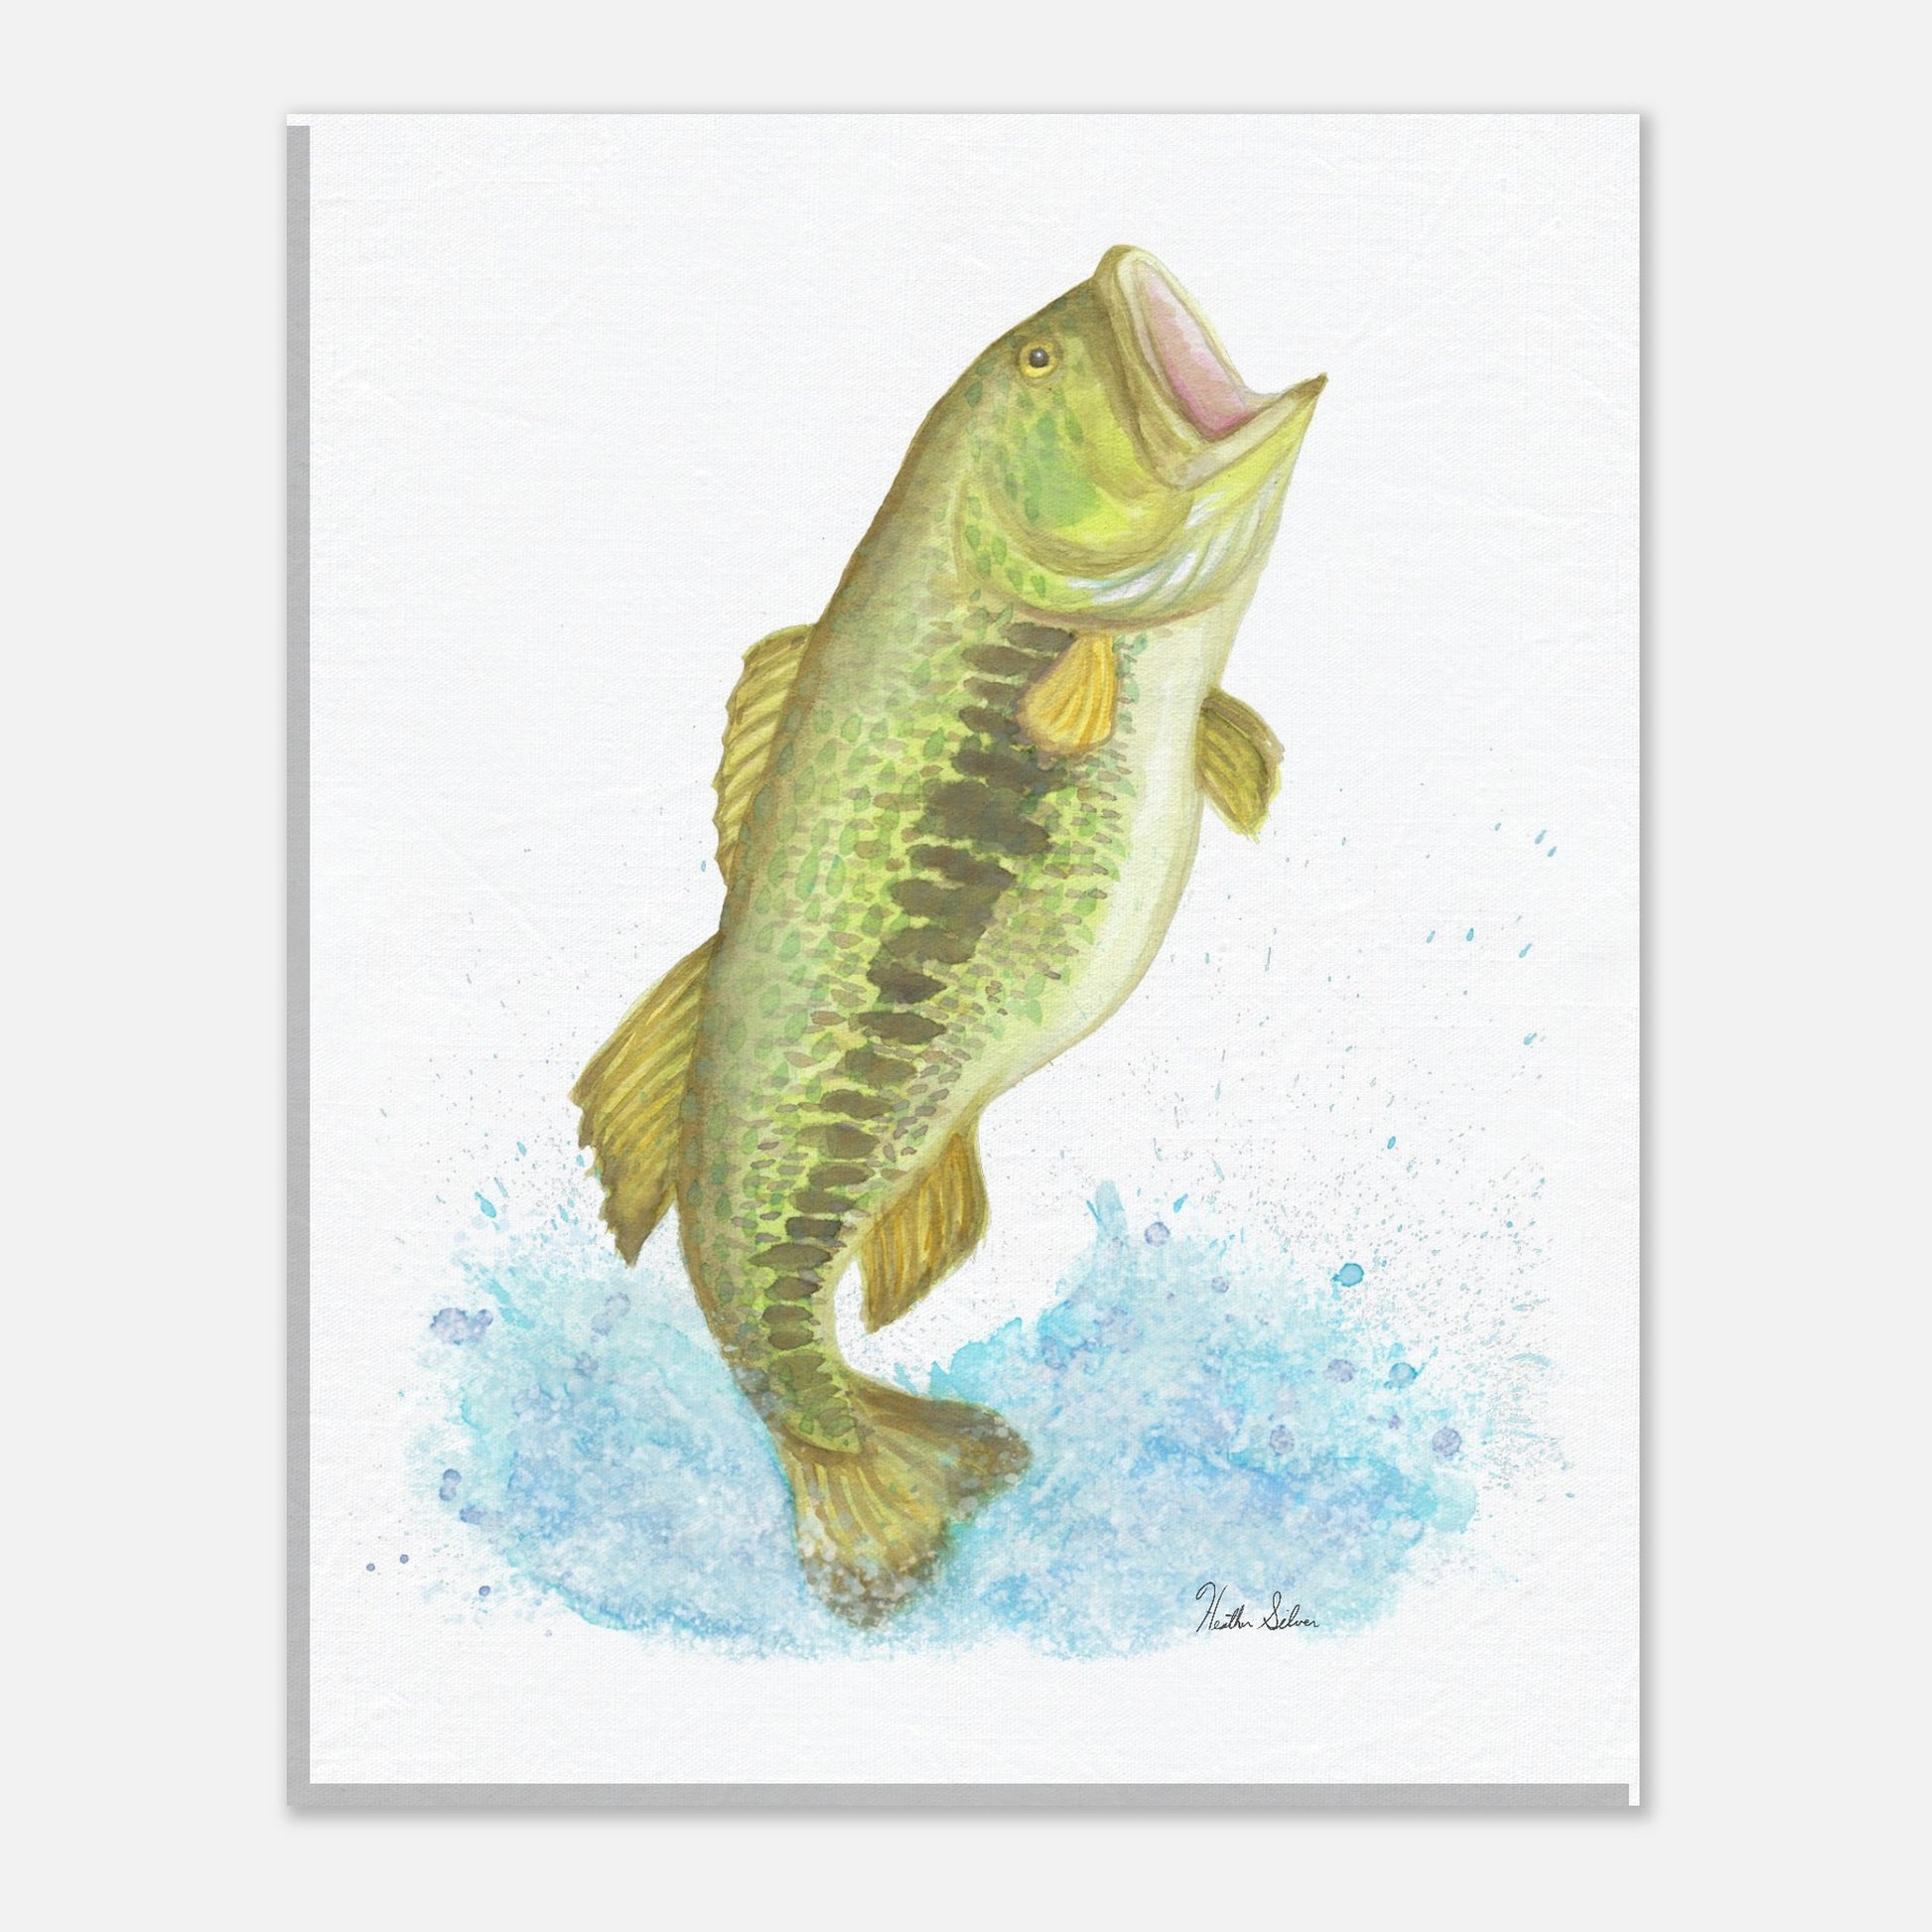 16 by 20 inch slim canvas wall art print featuring a watercolor painting of a largemouth bass leaping from the water. Hanging hardware included.